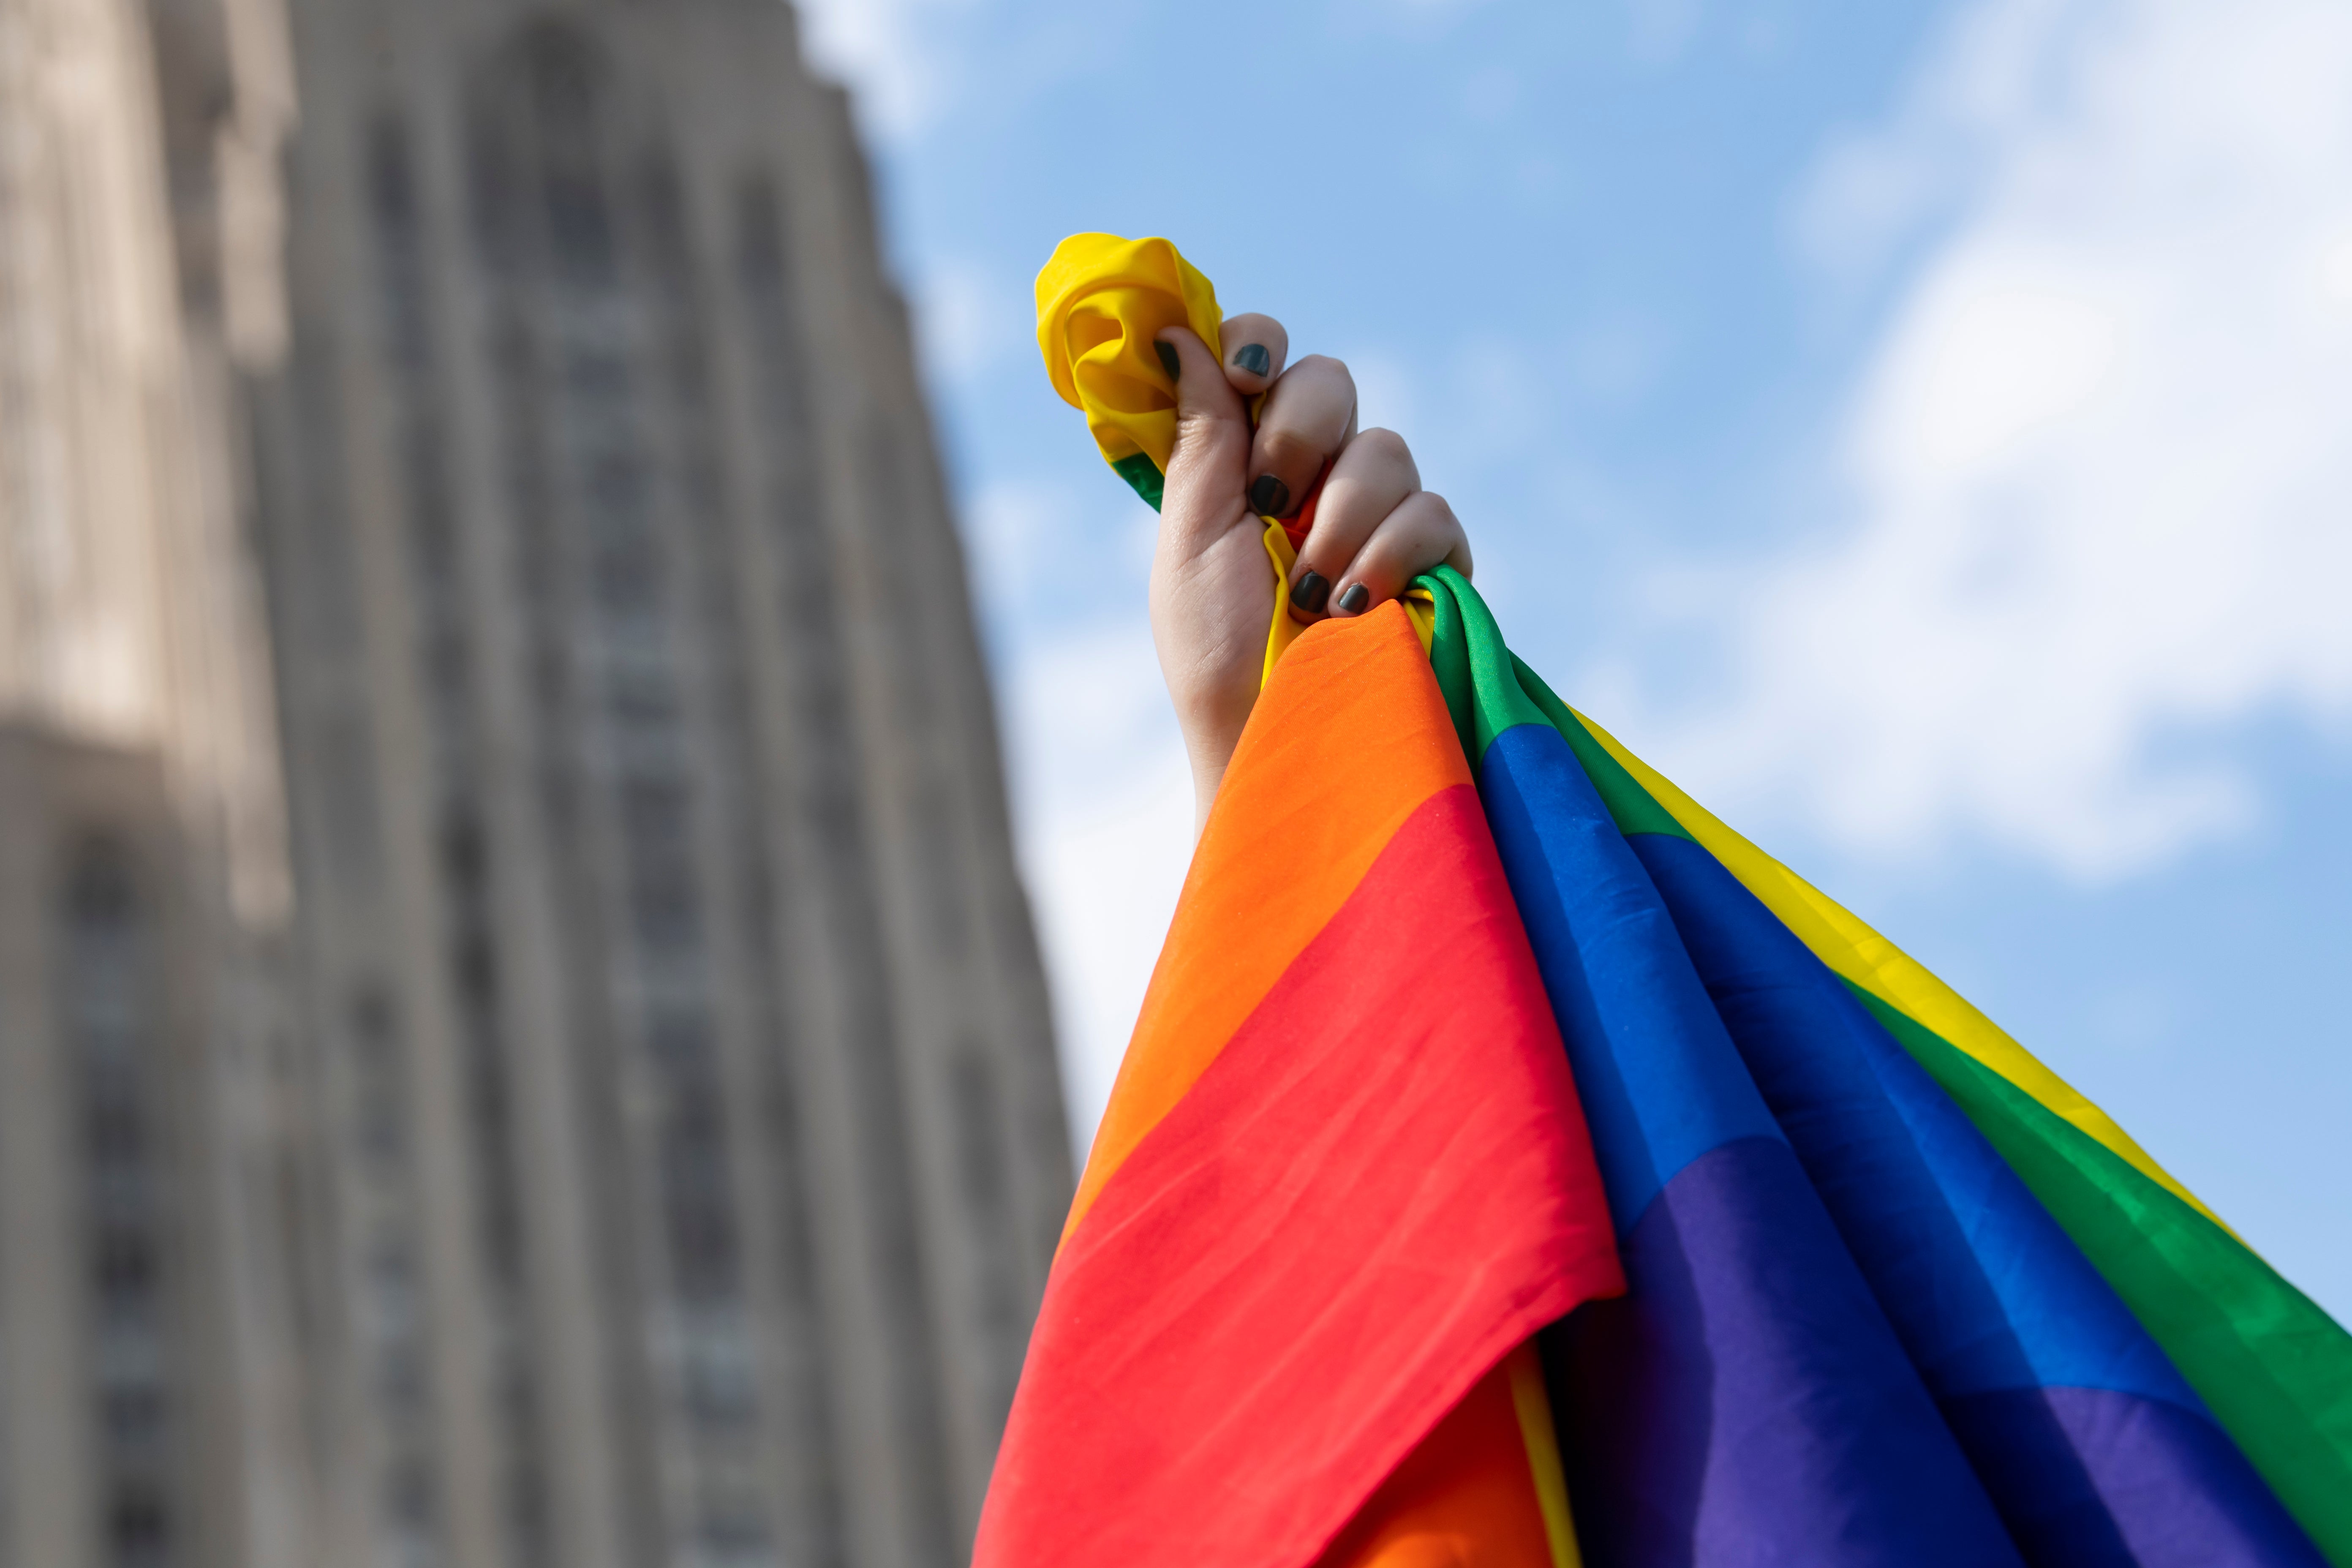 Leading Inclusion – How a Club Organized a Community's First Pride March